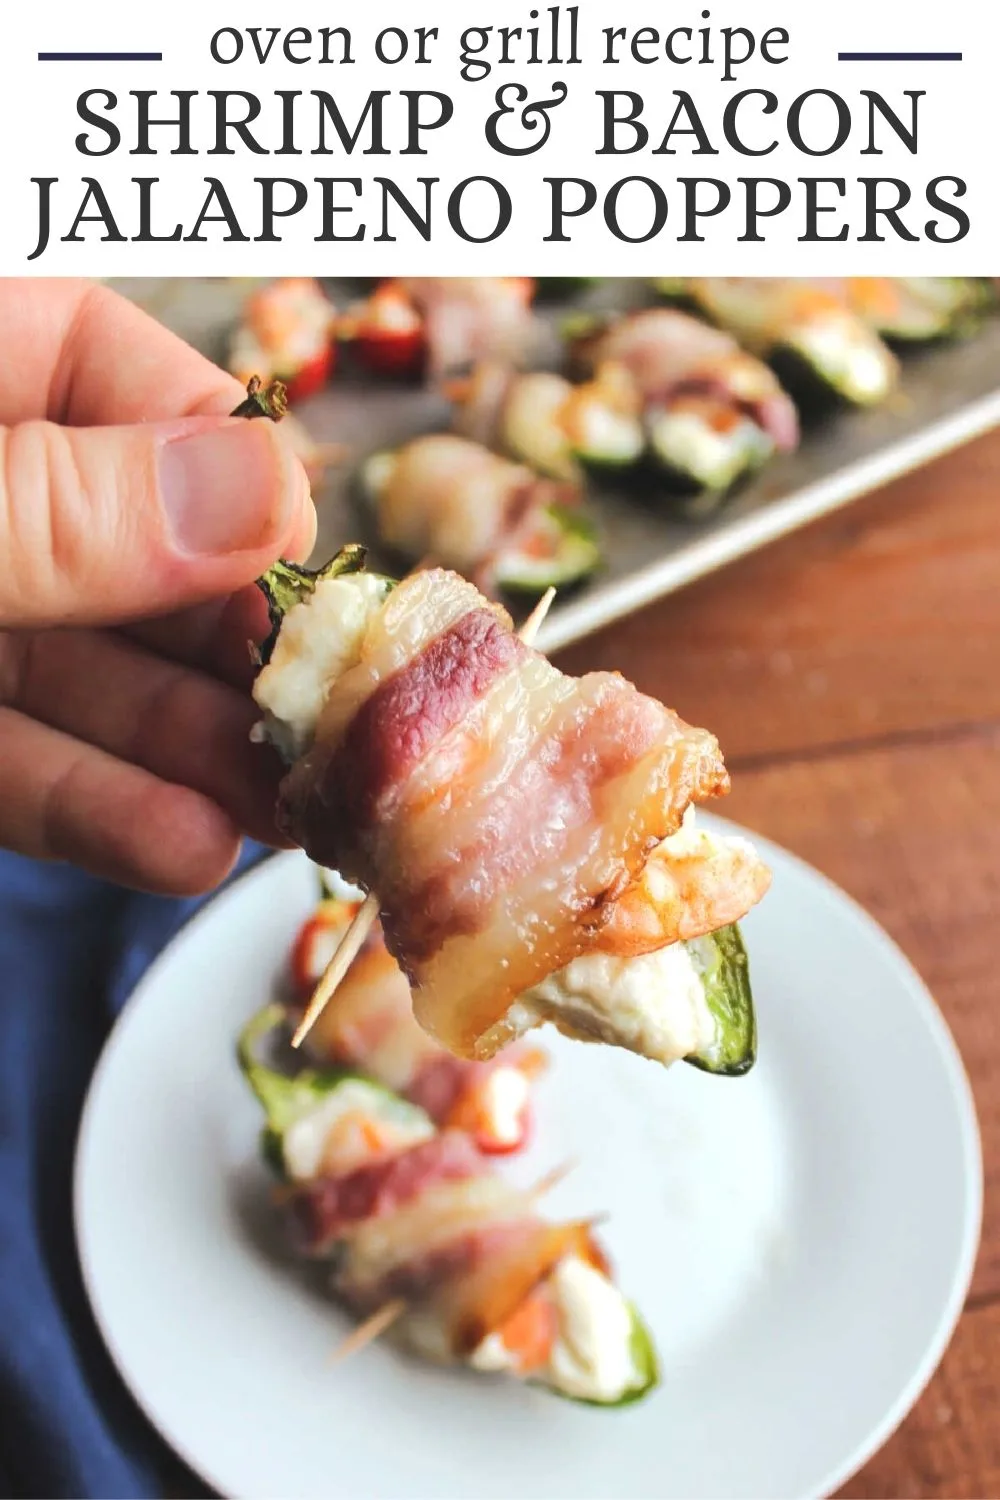 Jalapeno poppers of all kinds are delicious, but the ones with shrimp are among our favorites. Make these bacon wrapped shrimp jalapenos in the oven for a perfect party or game watching snack.